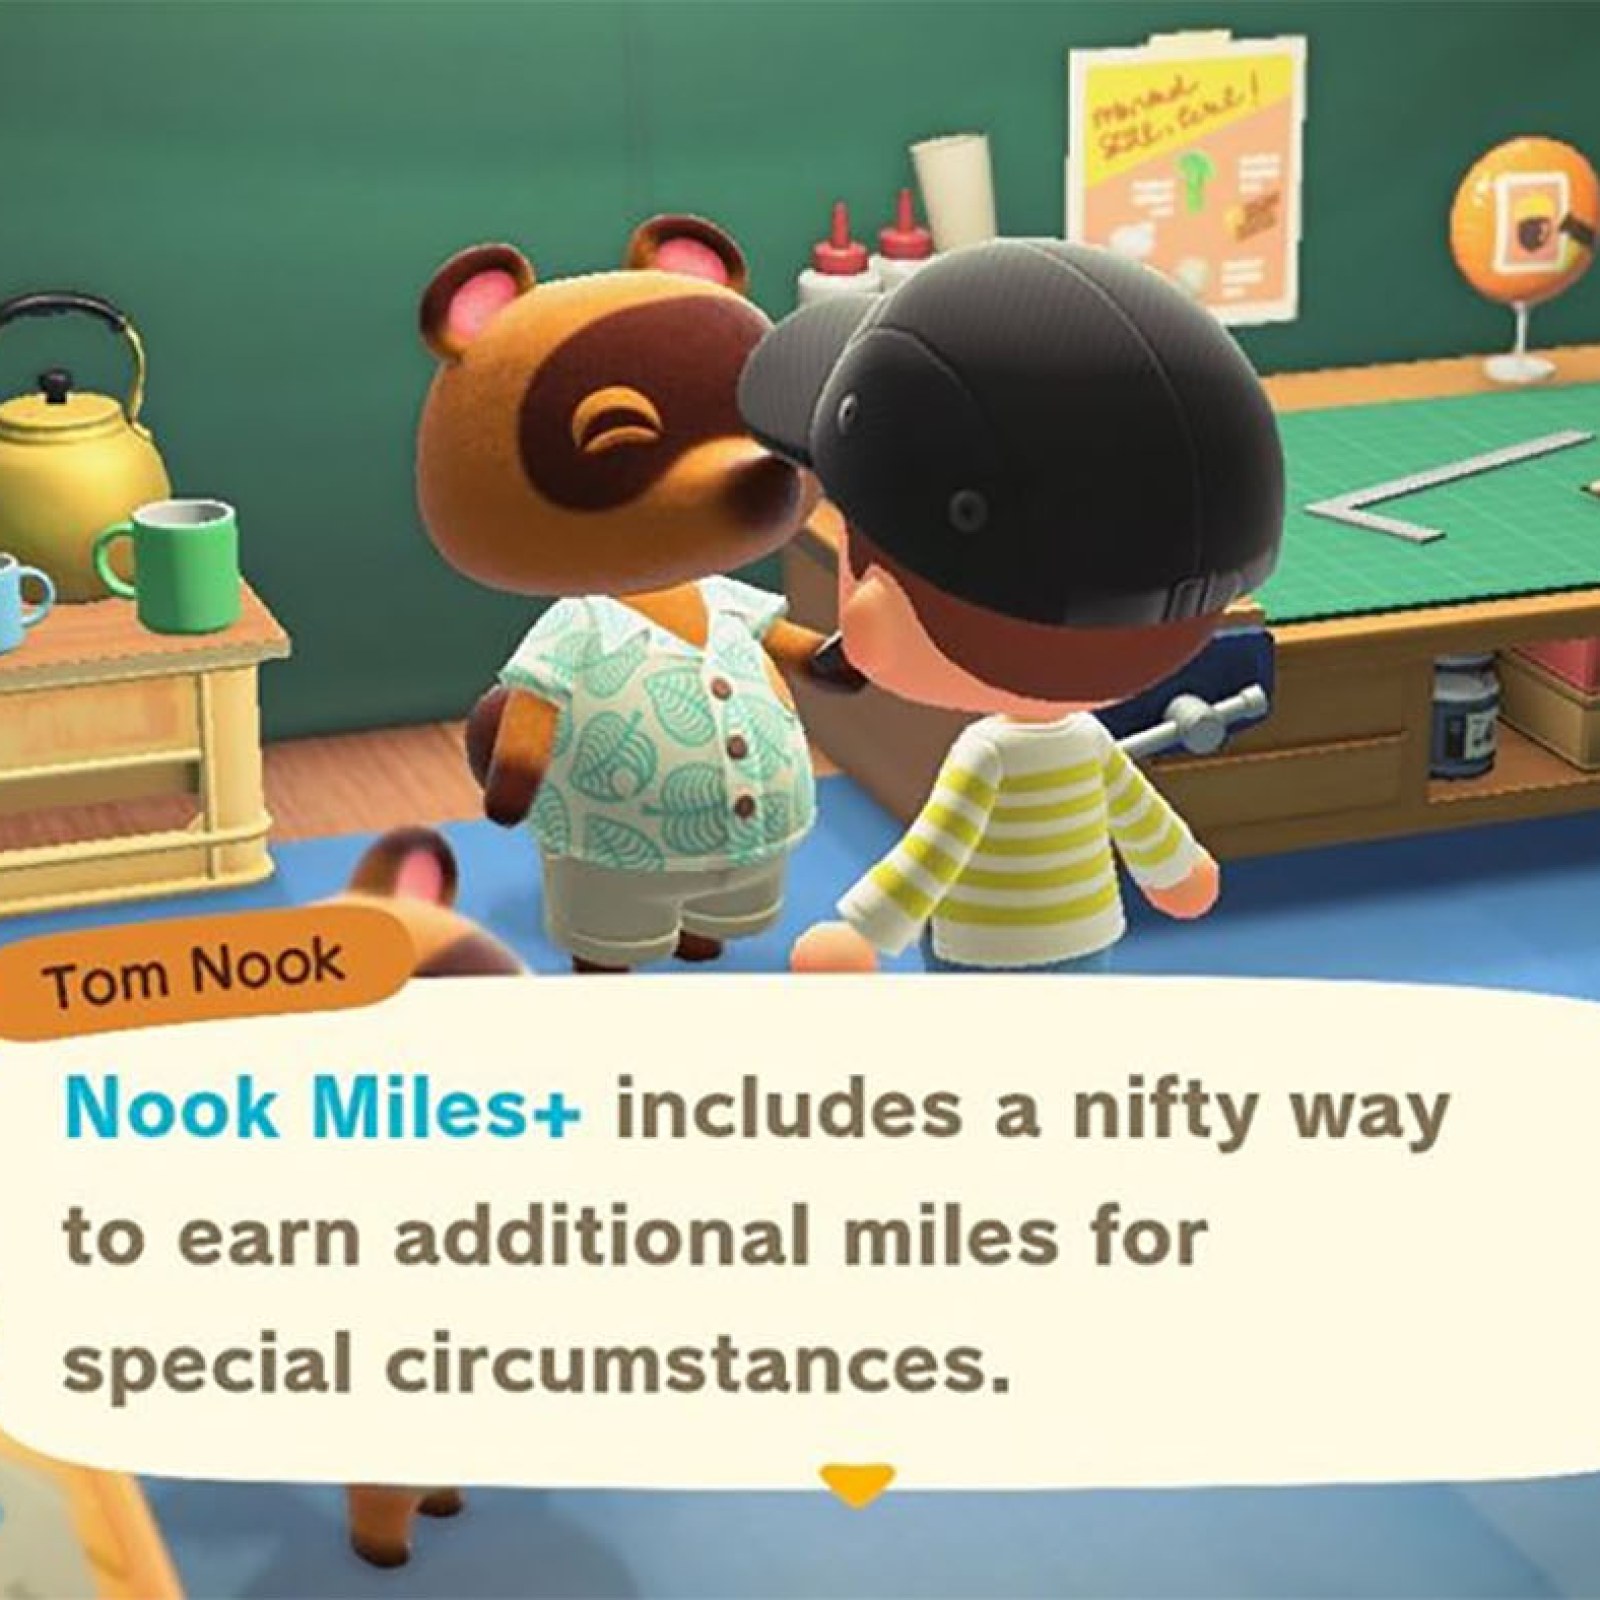 Animal Crossing New Horizons Nook Miles Guide How To Upgrade